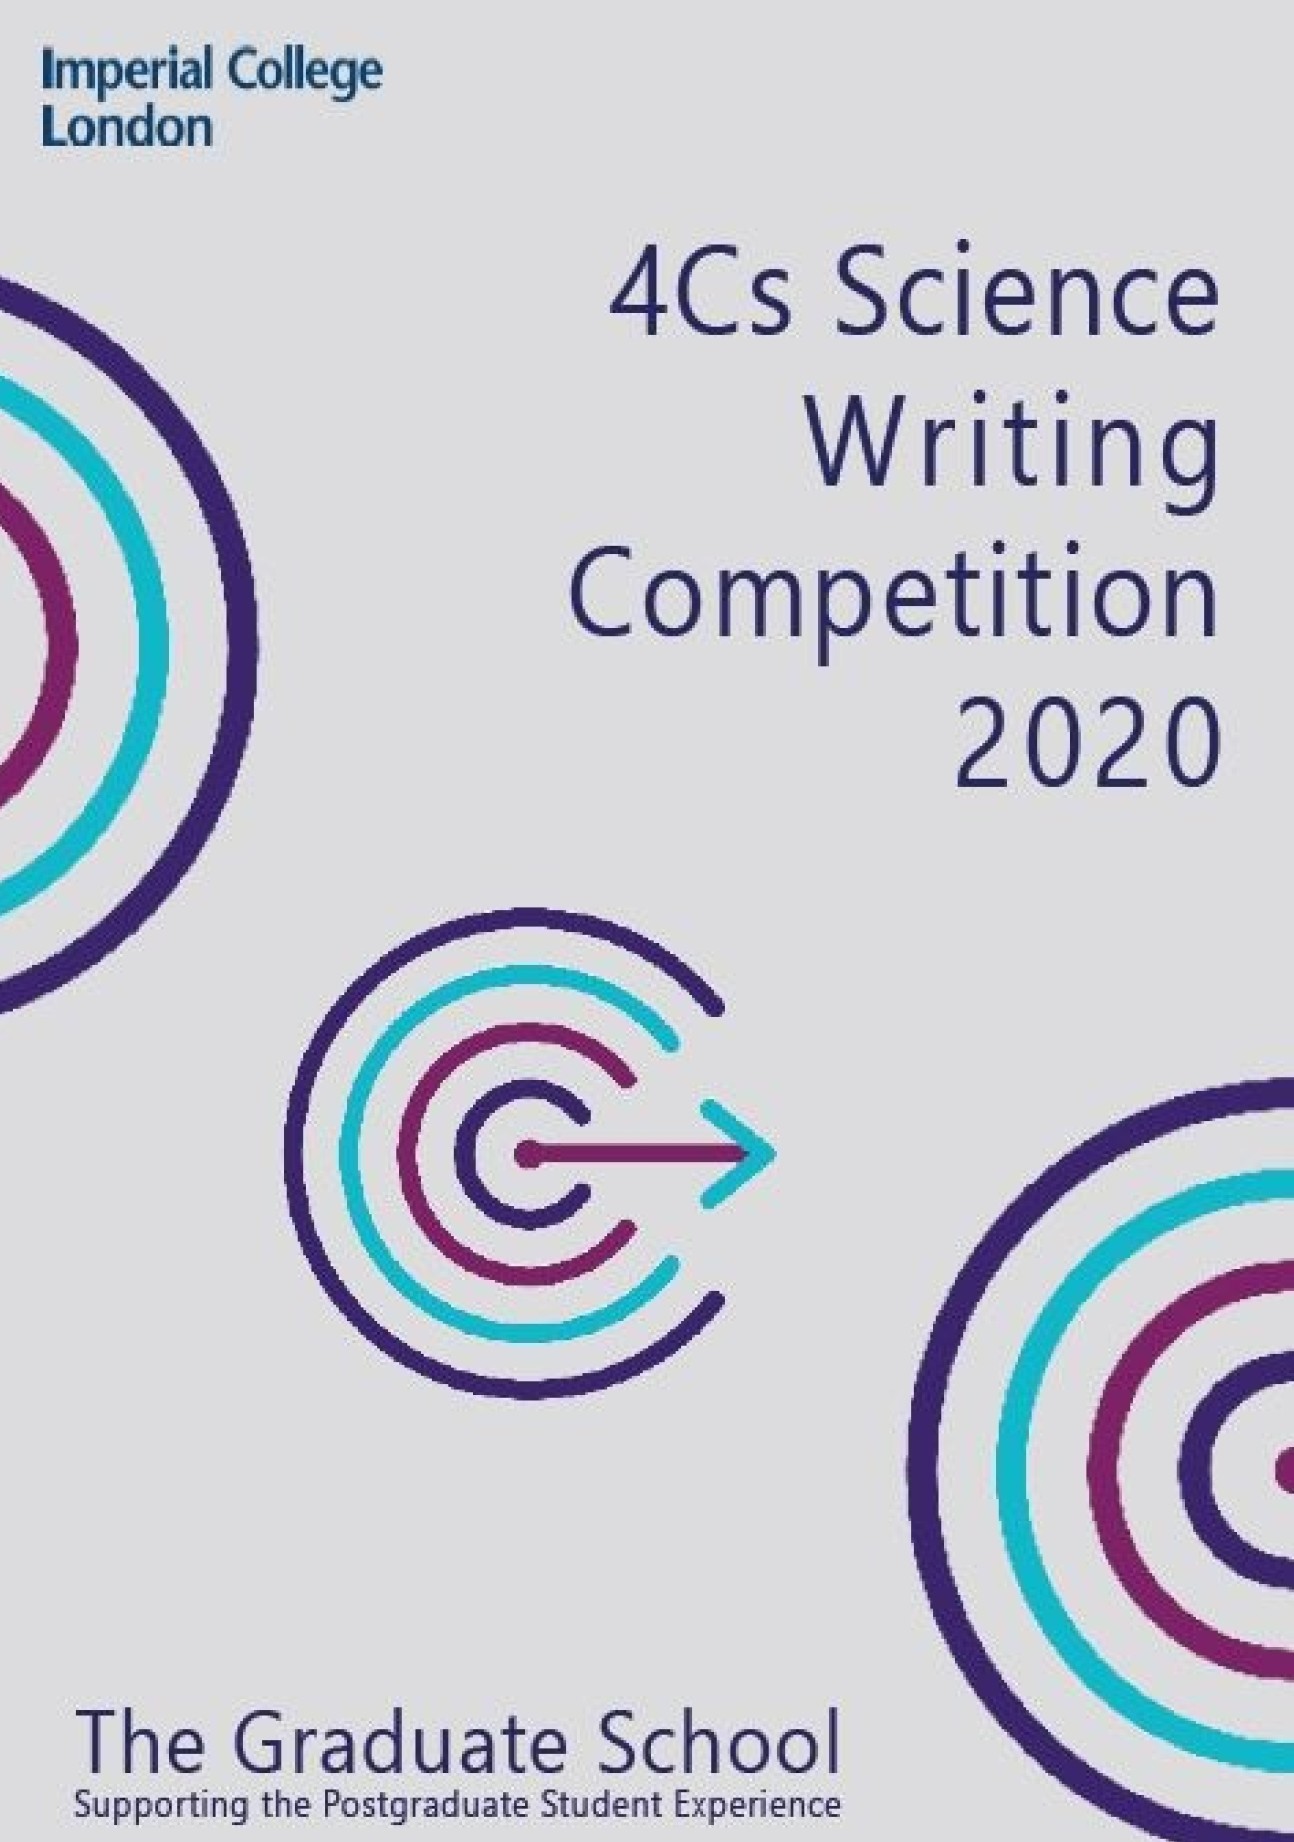 A poster for the 4Cs Science Writing Competition 2020